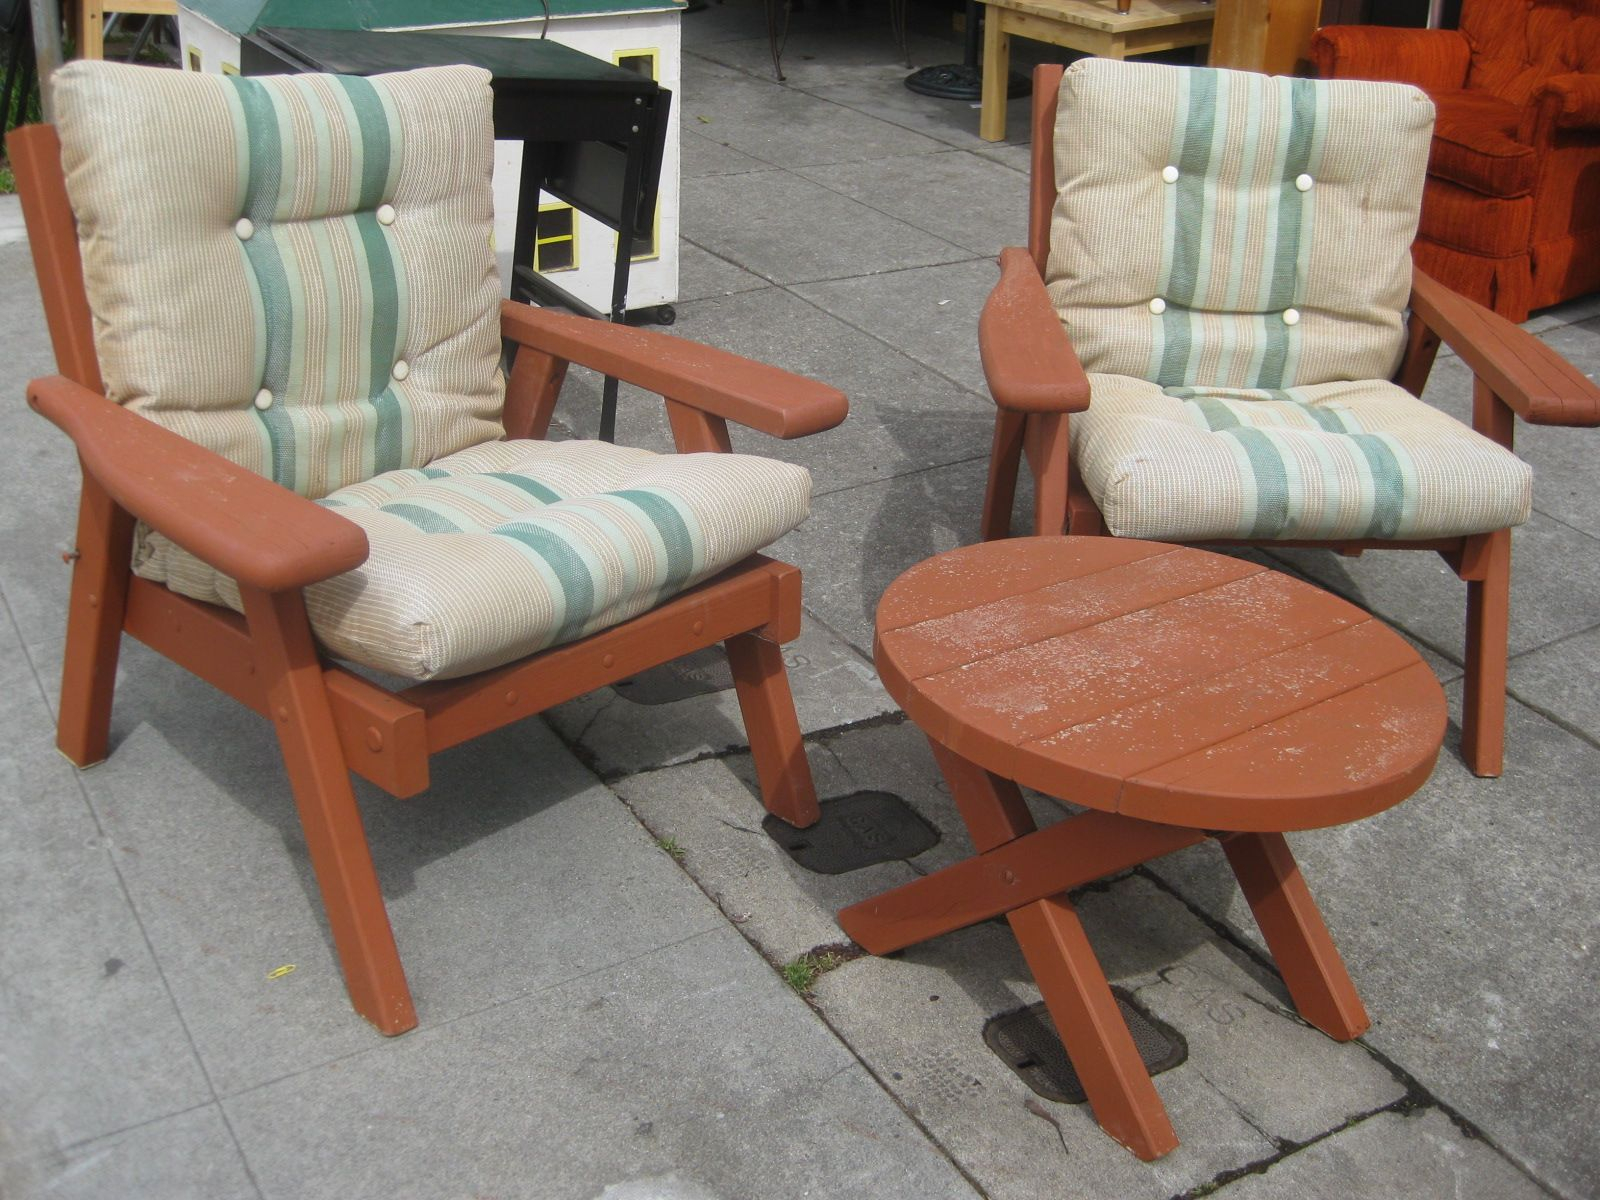 Redwood Patio Furniture Like Moms Patio Chairs Before I pertaining to dimensions 1600 X 1200